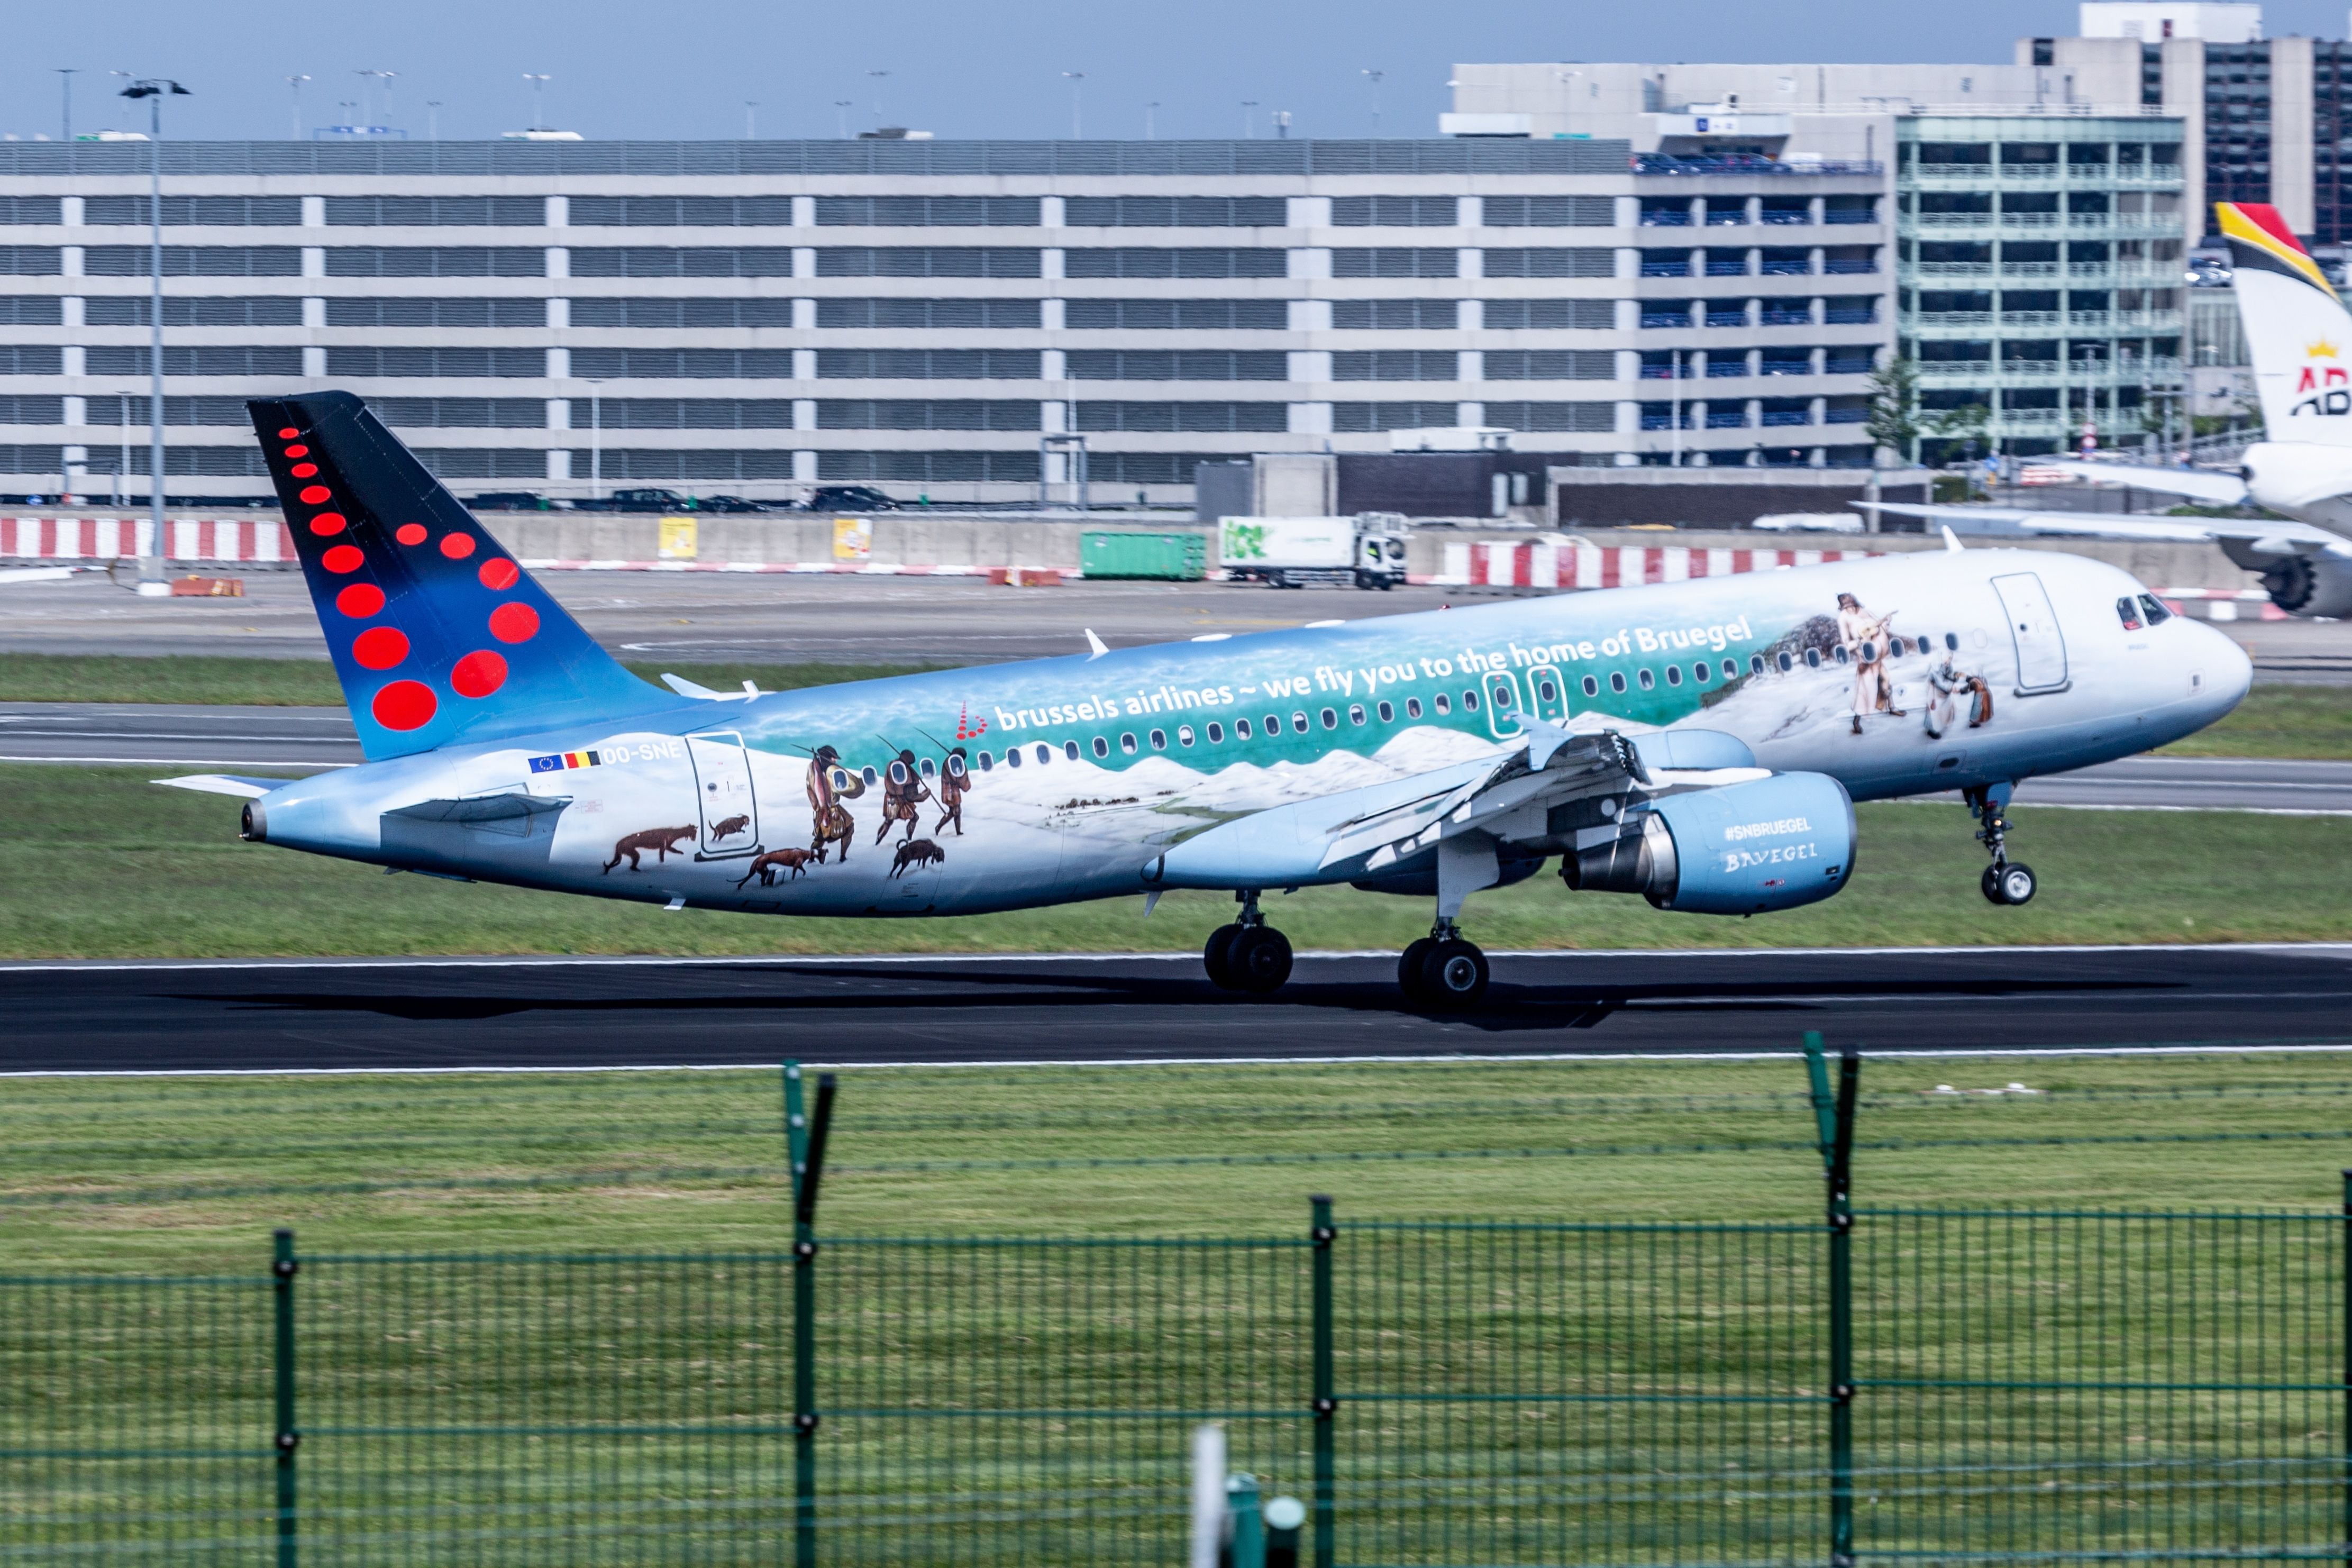 Brussels Airlines A320 with the Bruegel livery landing.